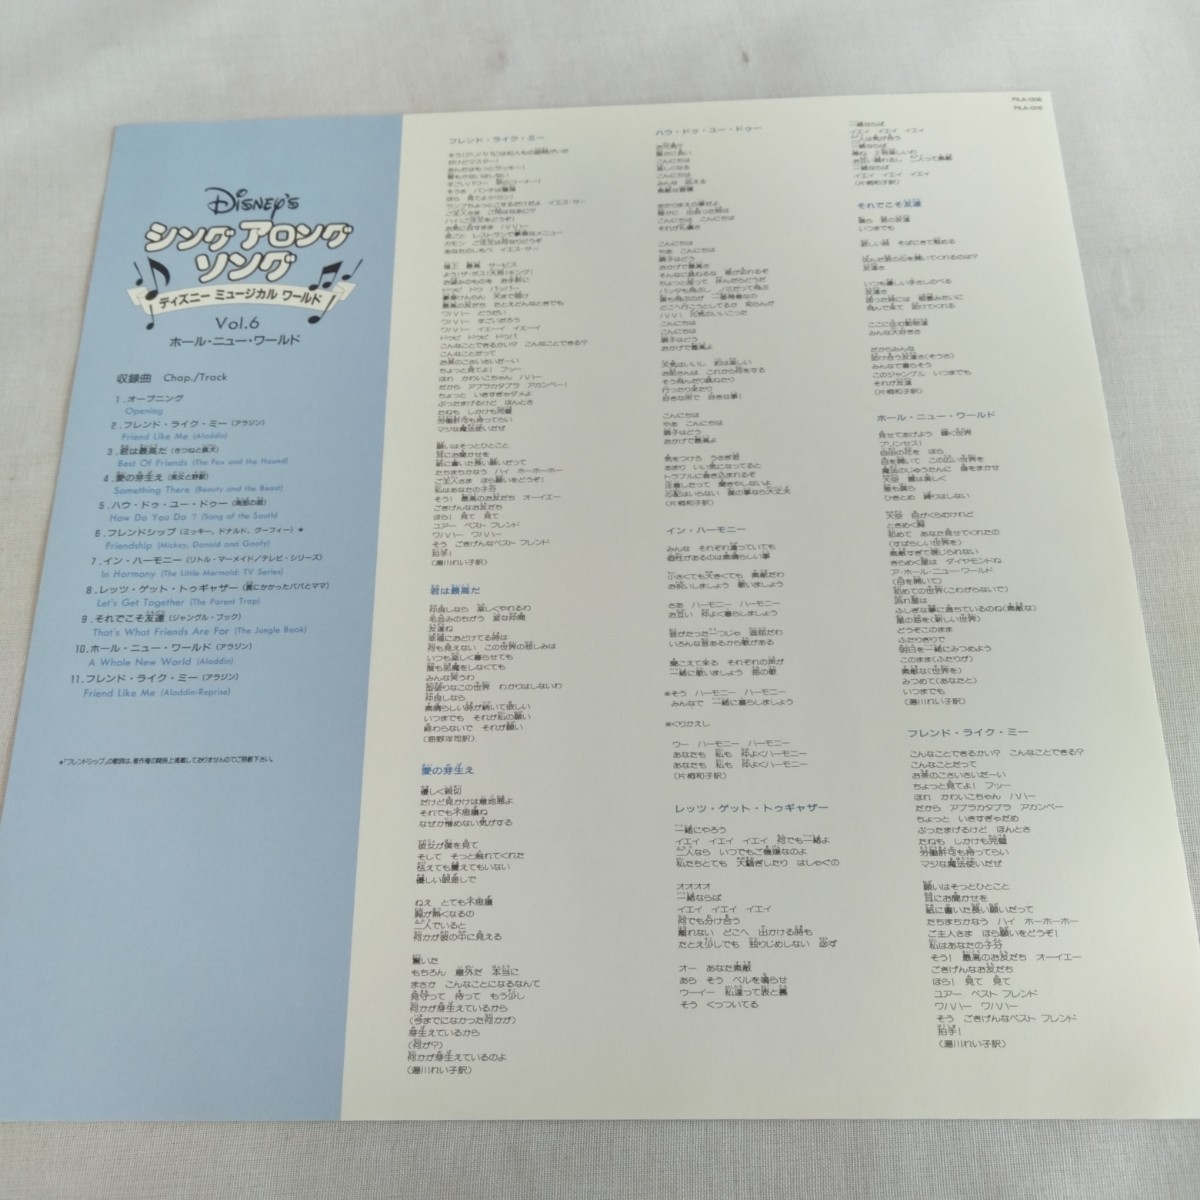 ta650 SING ALONGSONGS Vol.6 hole * new * world Disney Japanese title laser disk LD what sheets also uniform carriage 1,000 jpy reproduction not yet verification 